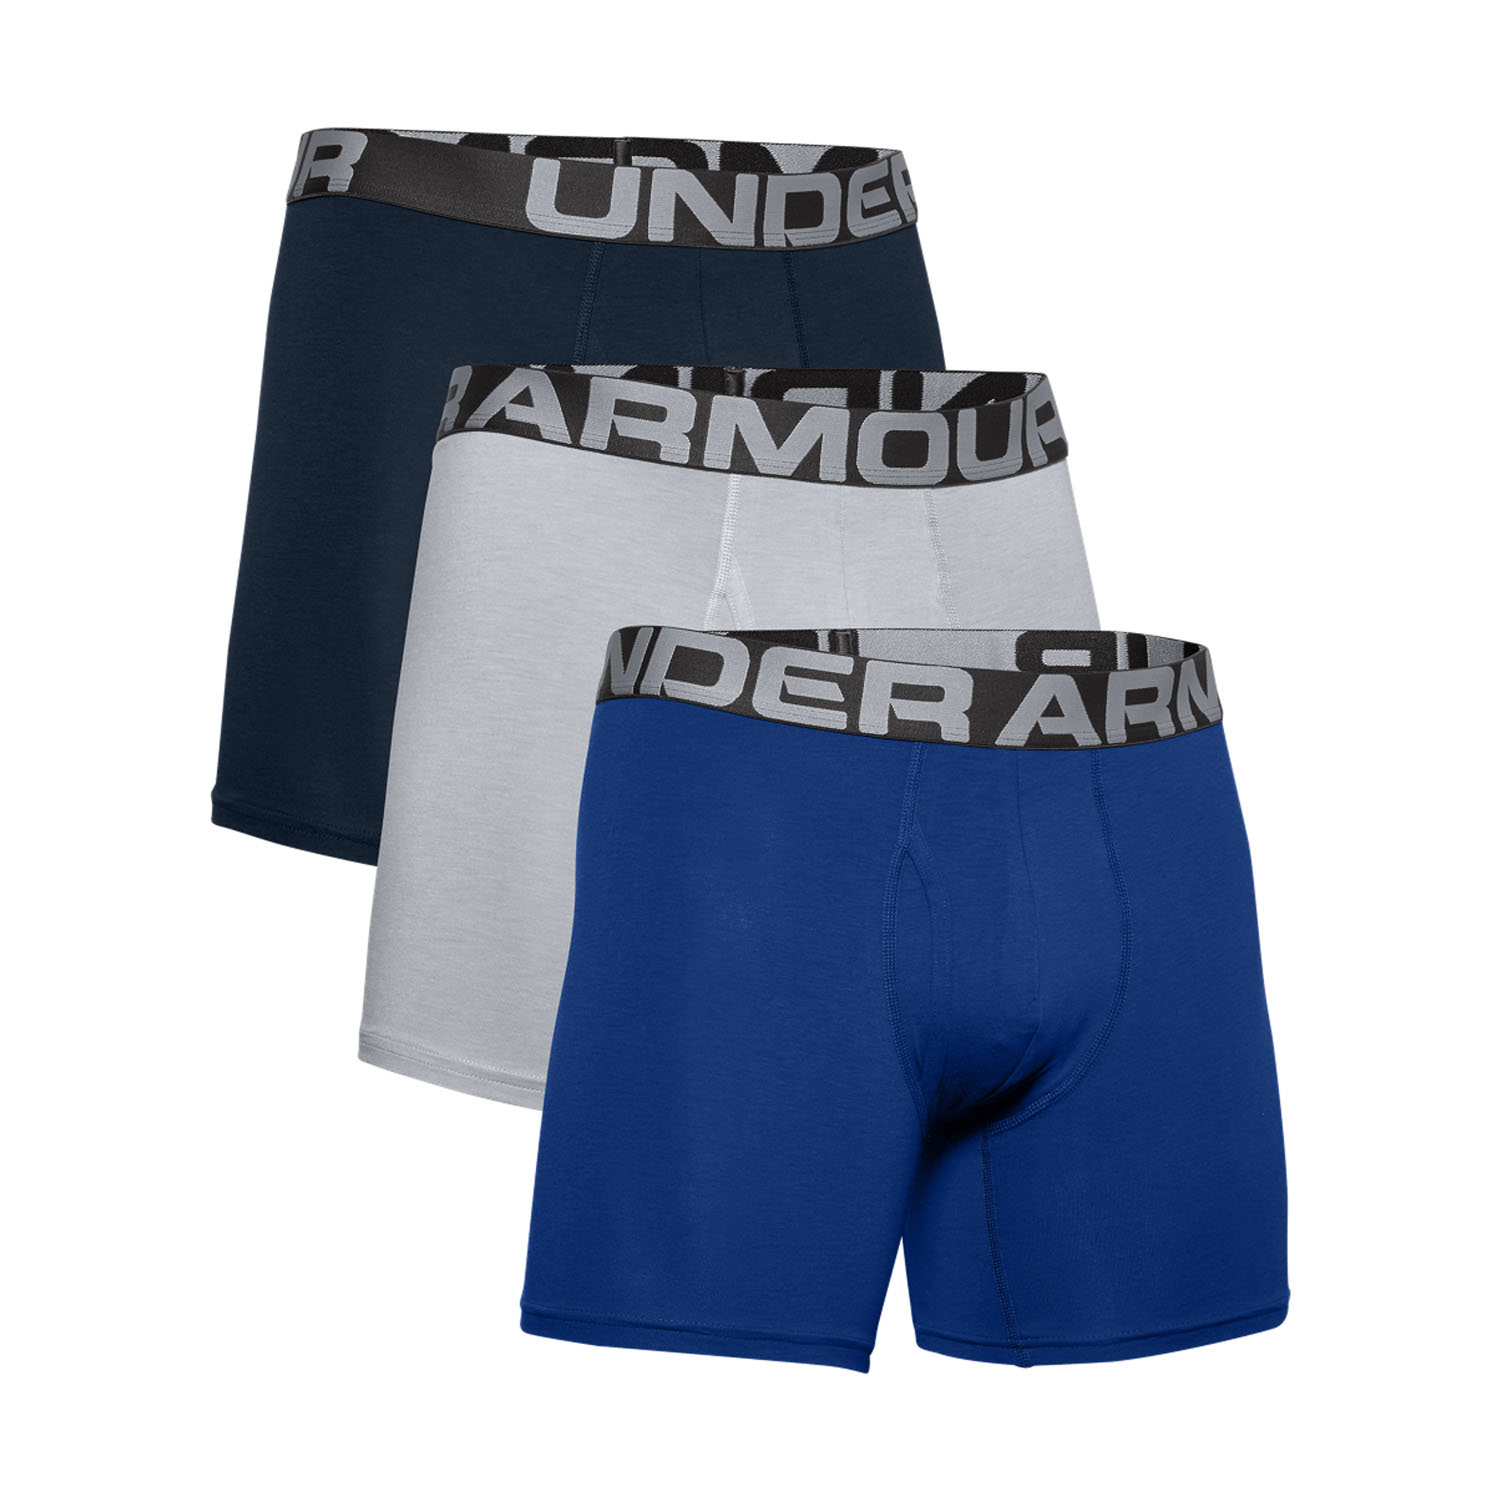 Under Armour Charged Cotton 6in x 3 Boxer - Royal/Academy/Mod Gray Medium Heather